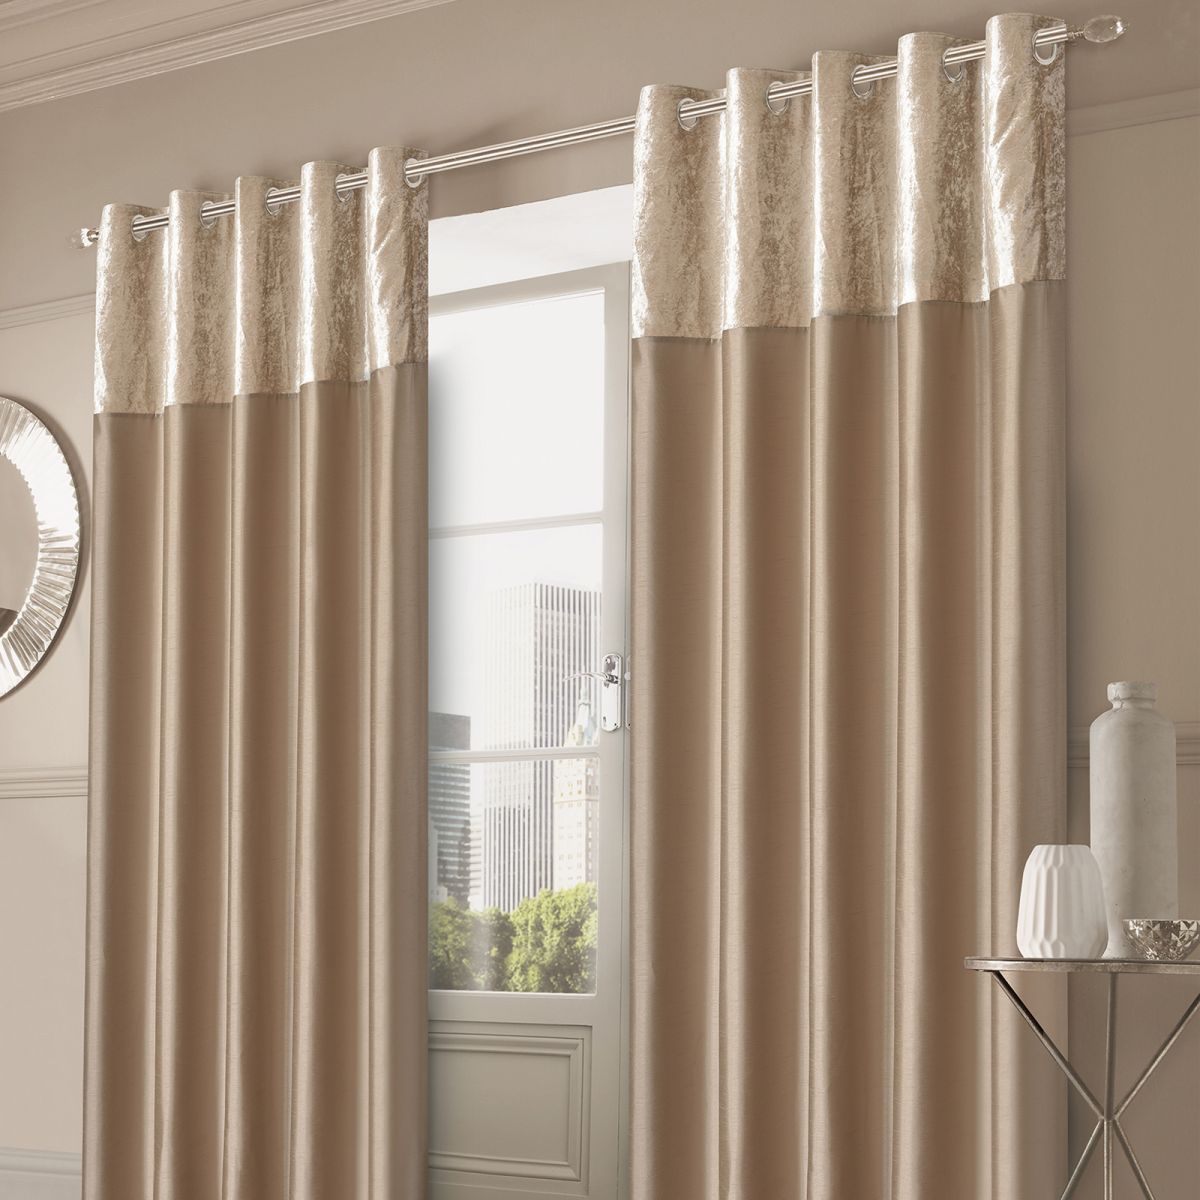 Sienna Home Crushed Velvet Band Eyelet Curtains, Gold - 66"x54"